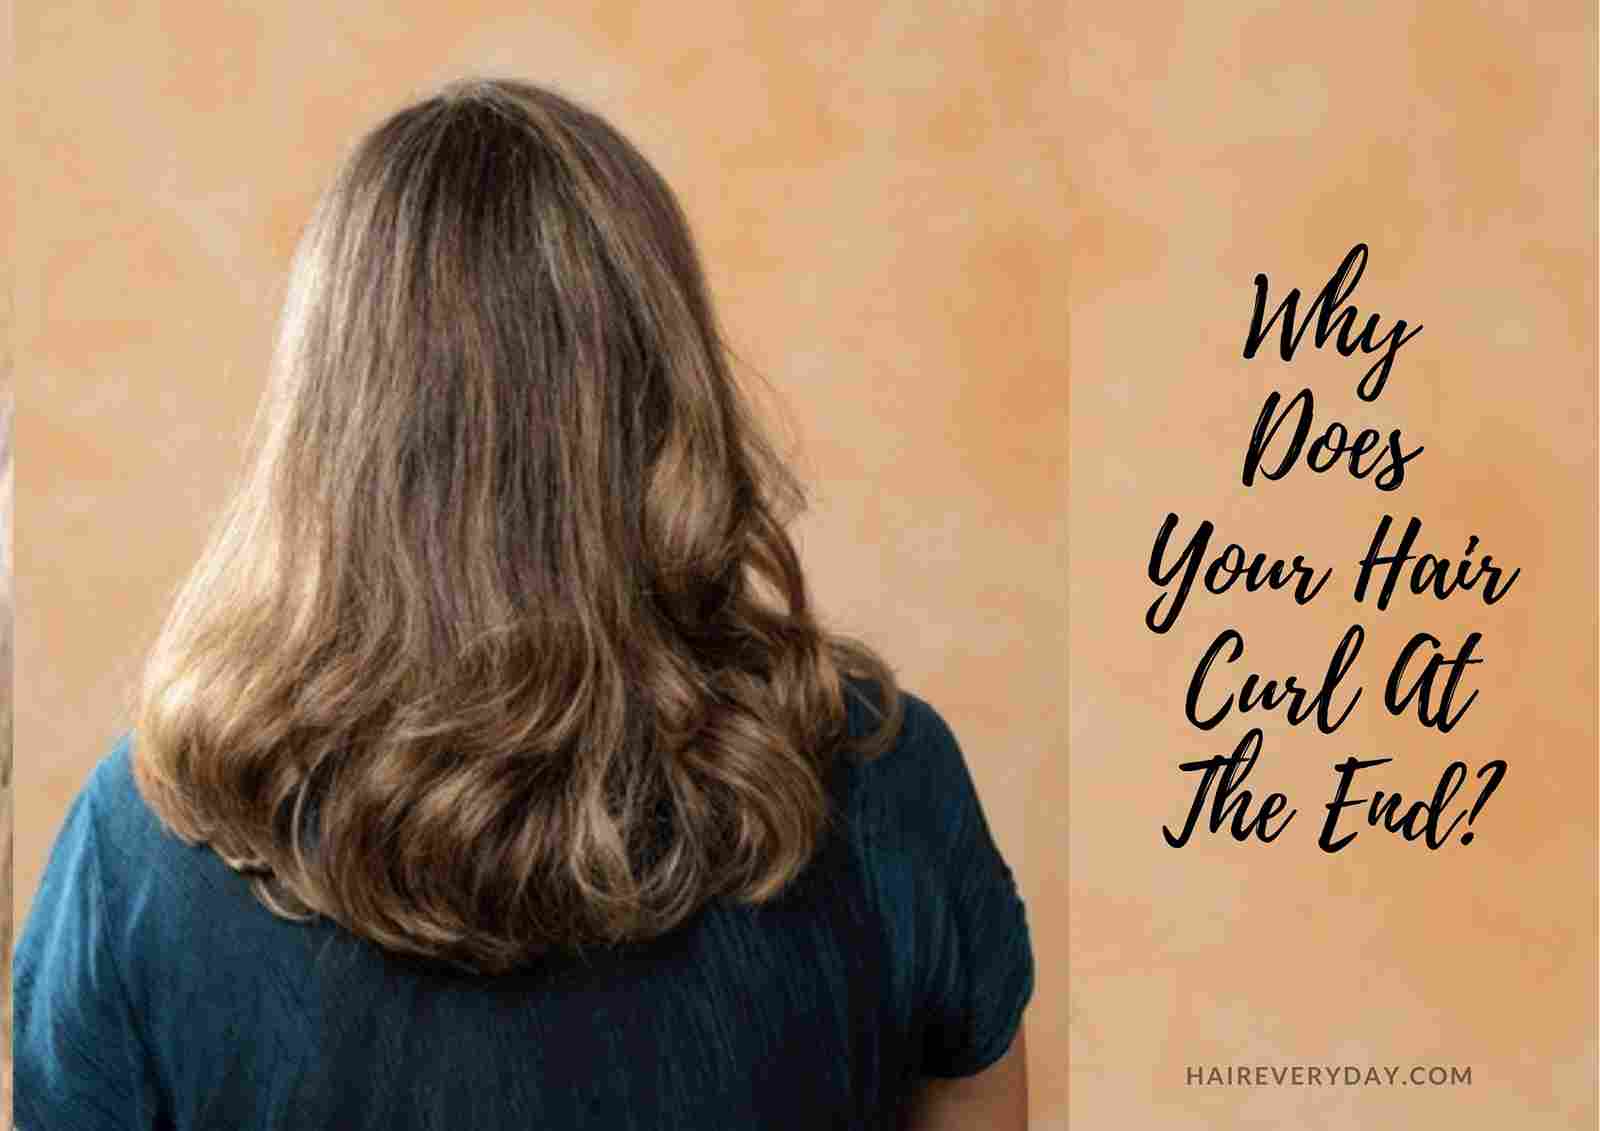 Why Does My Hair Curl At The Ends | 9 Top Reasons Your Hair Flicks At Ends  - Hair Everyday Review